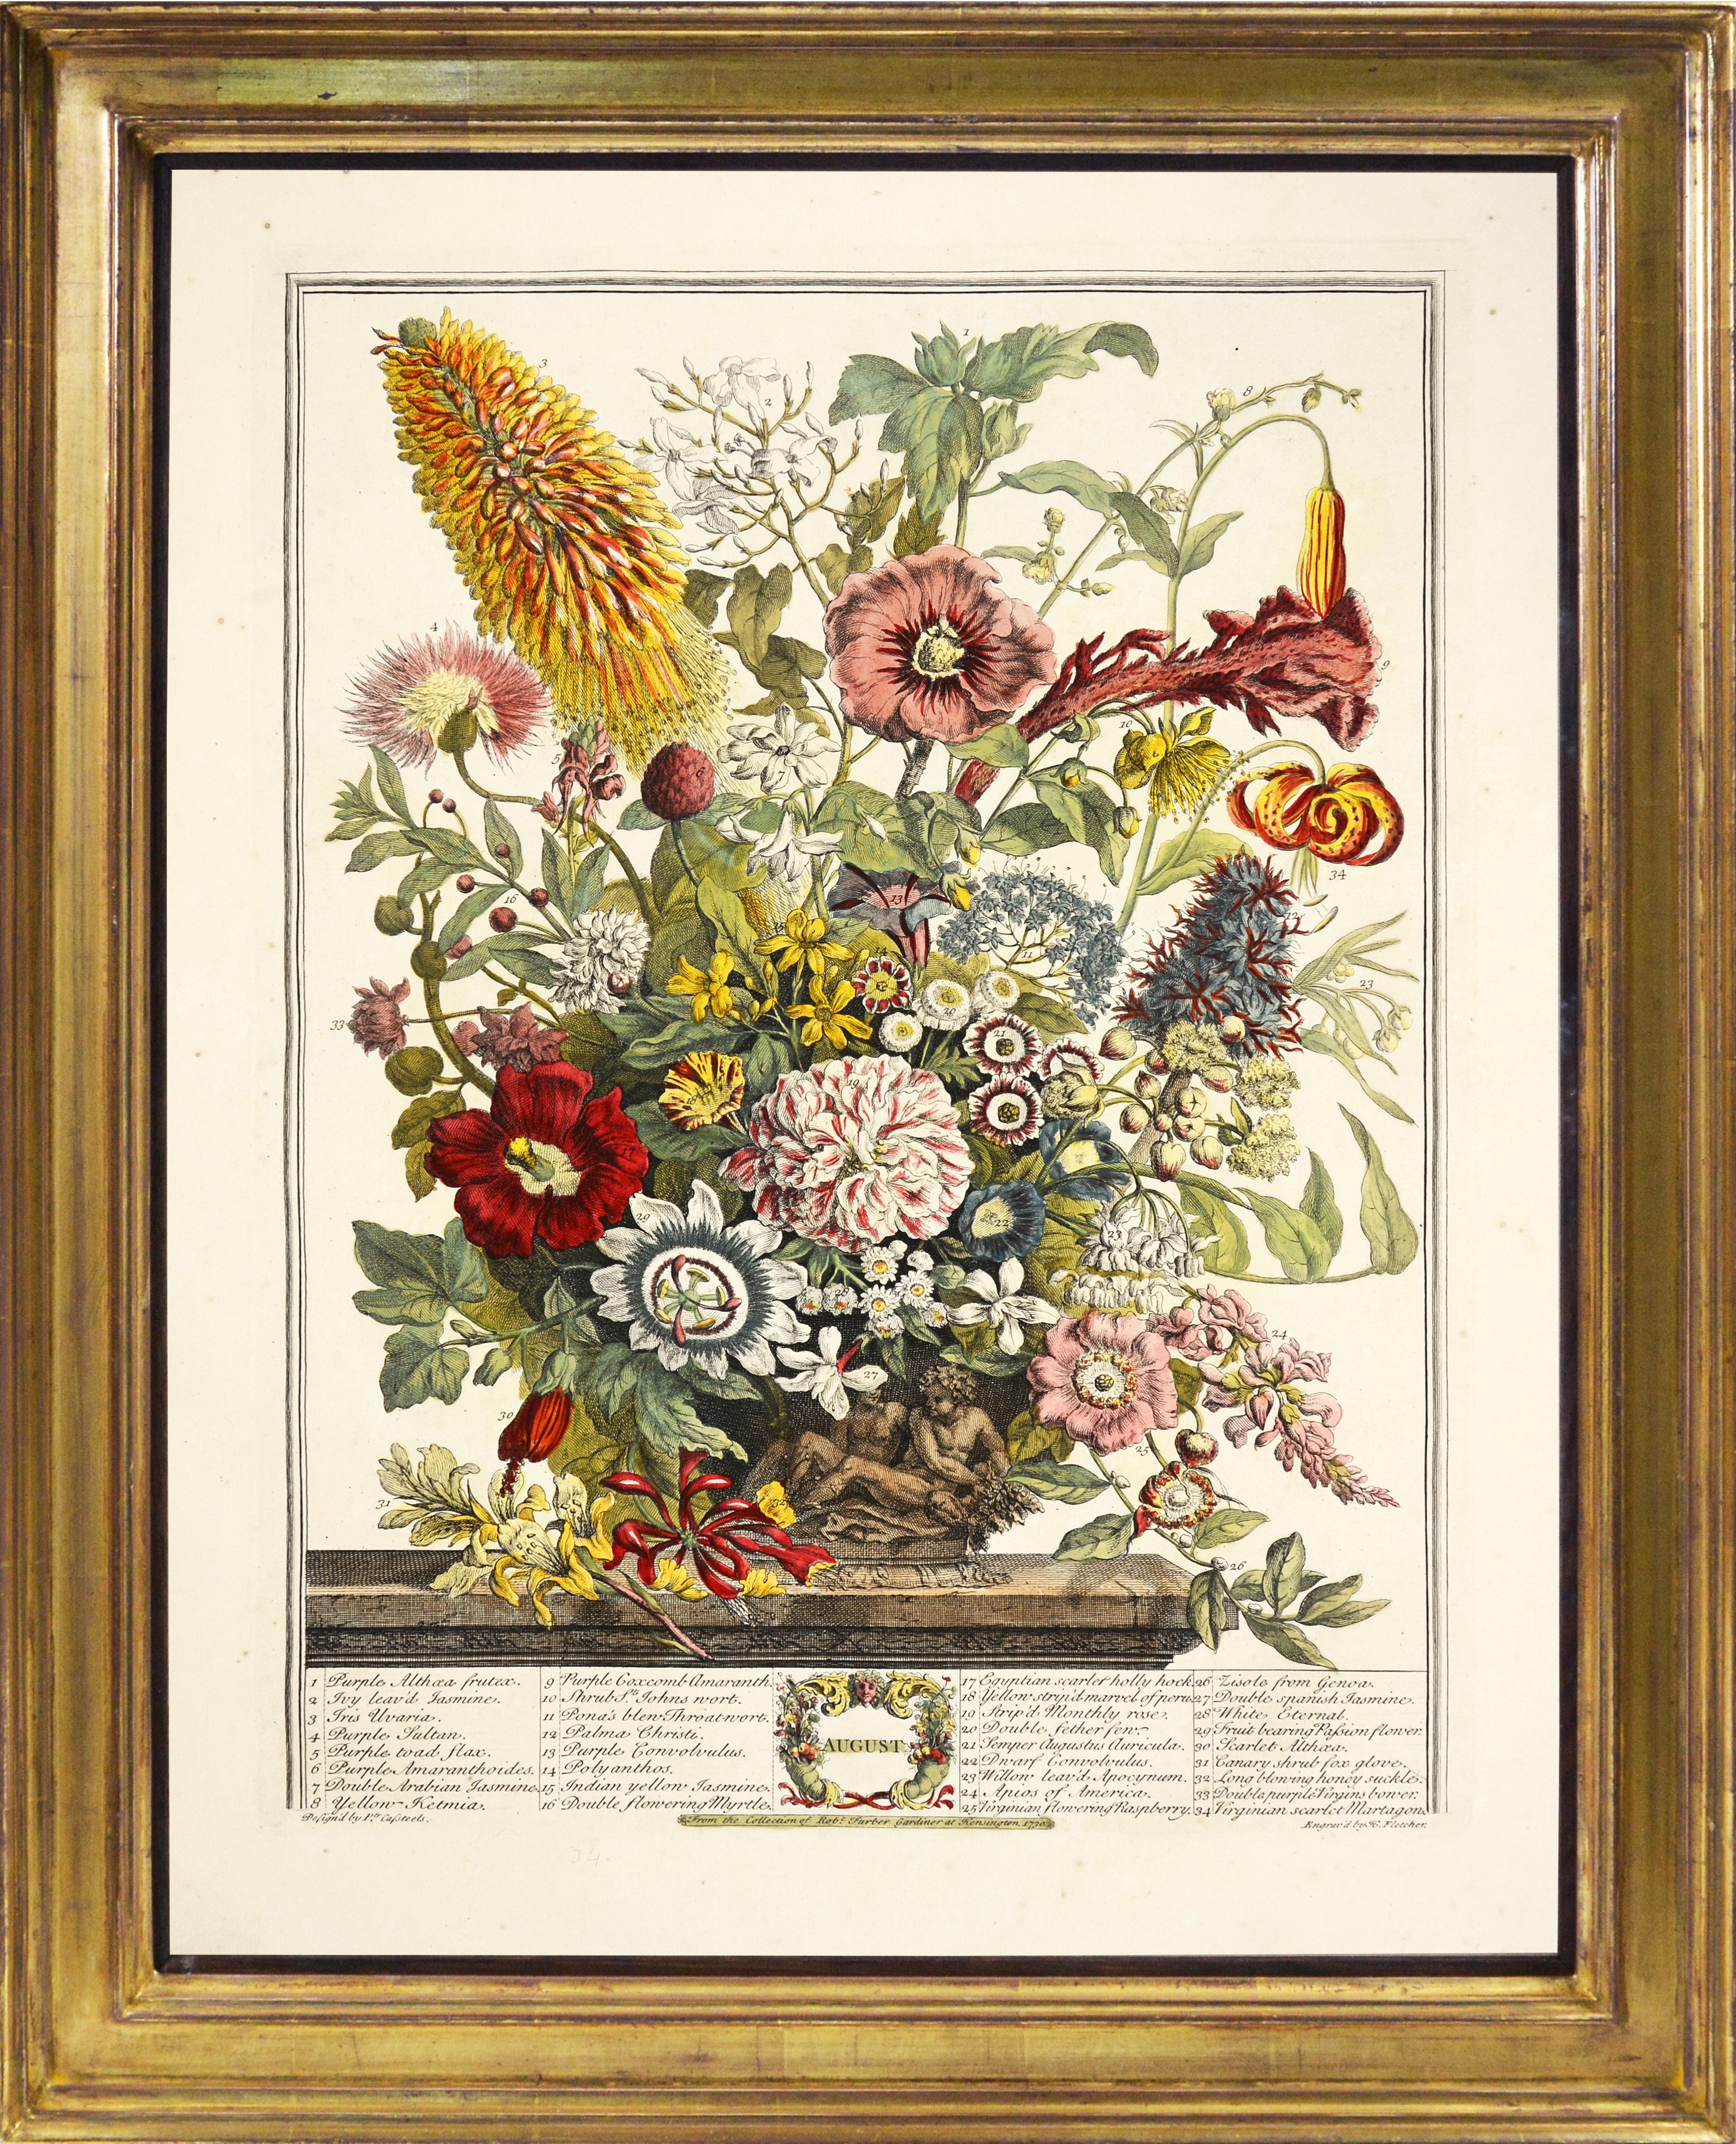 Spectacular floral calendar. 
FURBER, Robert.
Twelve months of flowers.
[London, 1730-32].

Twelve hand-coloured plates designed by Pieter Casteels and engraved by H. Fletcher.   
Sheet size:  46cm by 58.5cm.  

Rare complete set of what was